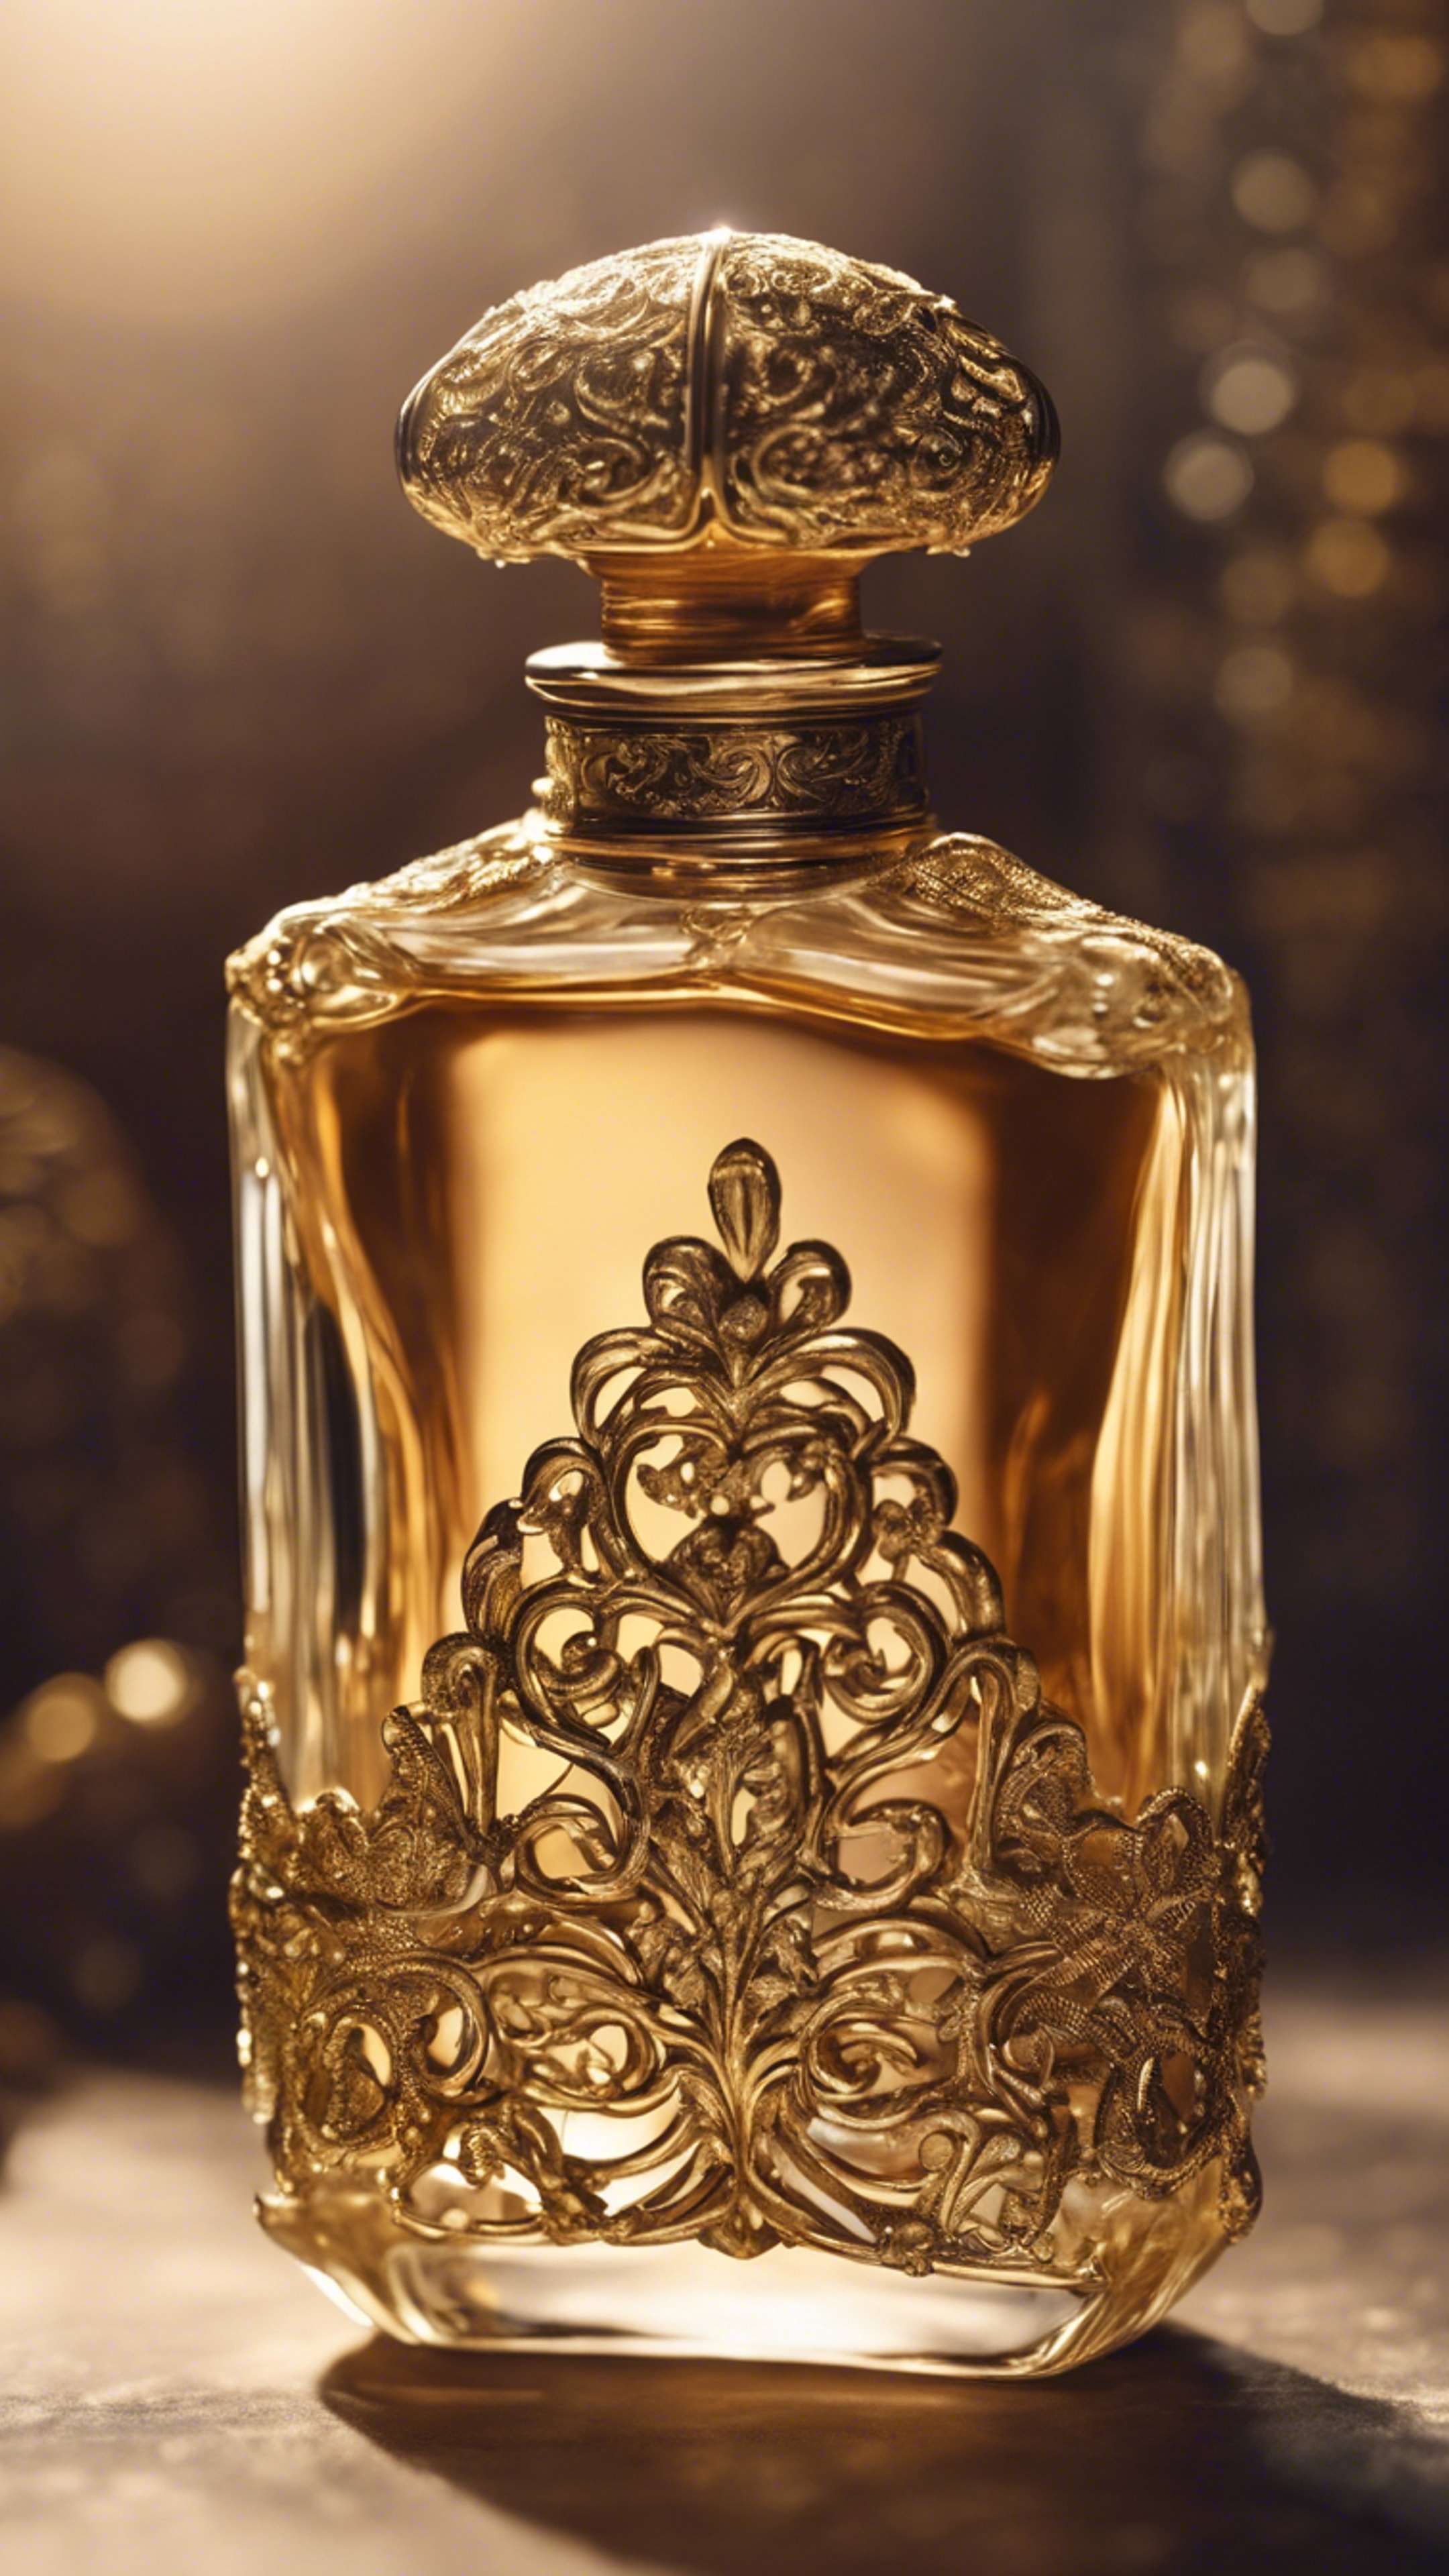 An antique perfume bottle with delicate gold filigree luxury cosmetic item. Шпалери[fe361f22190a4891a6d9]